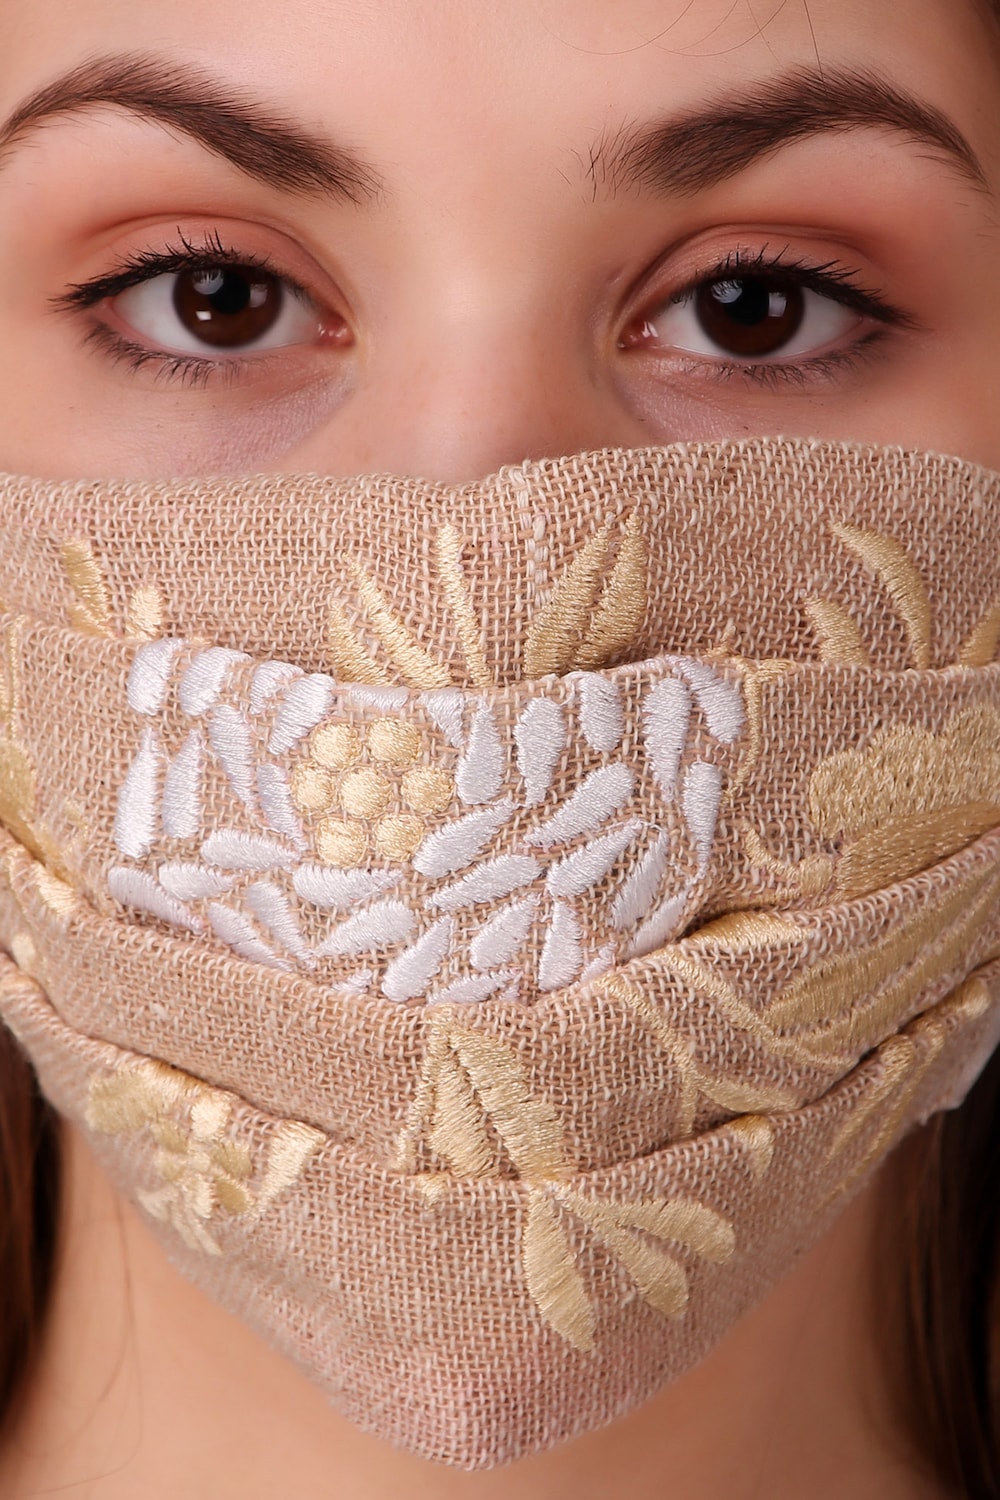 Floral Embroidered Jute Pleated Face Mask